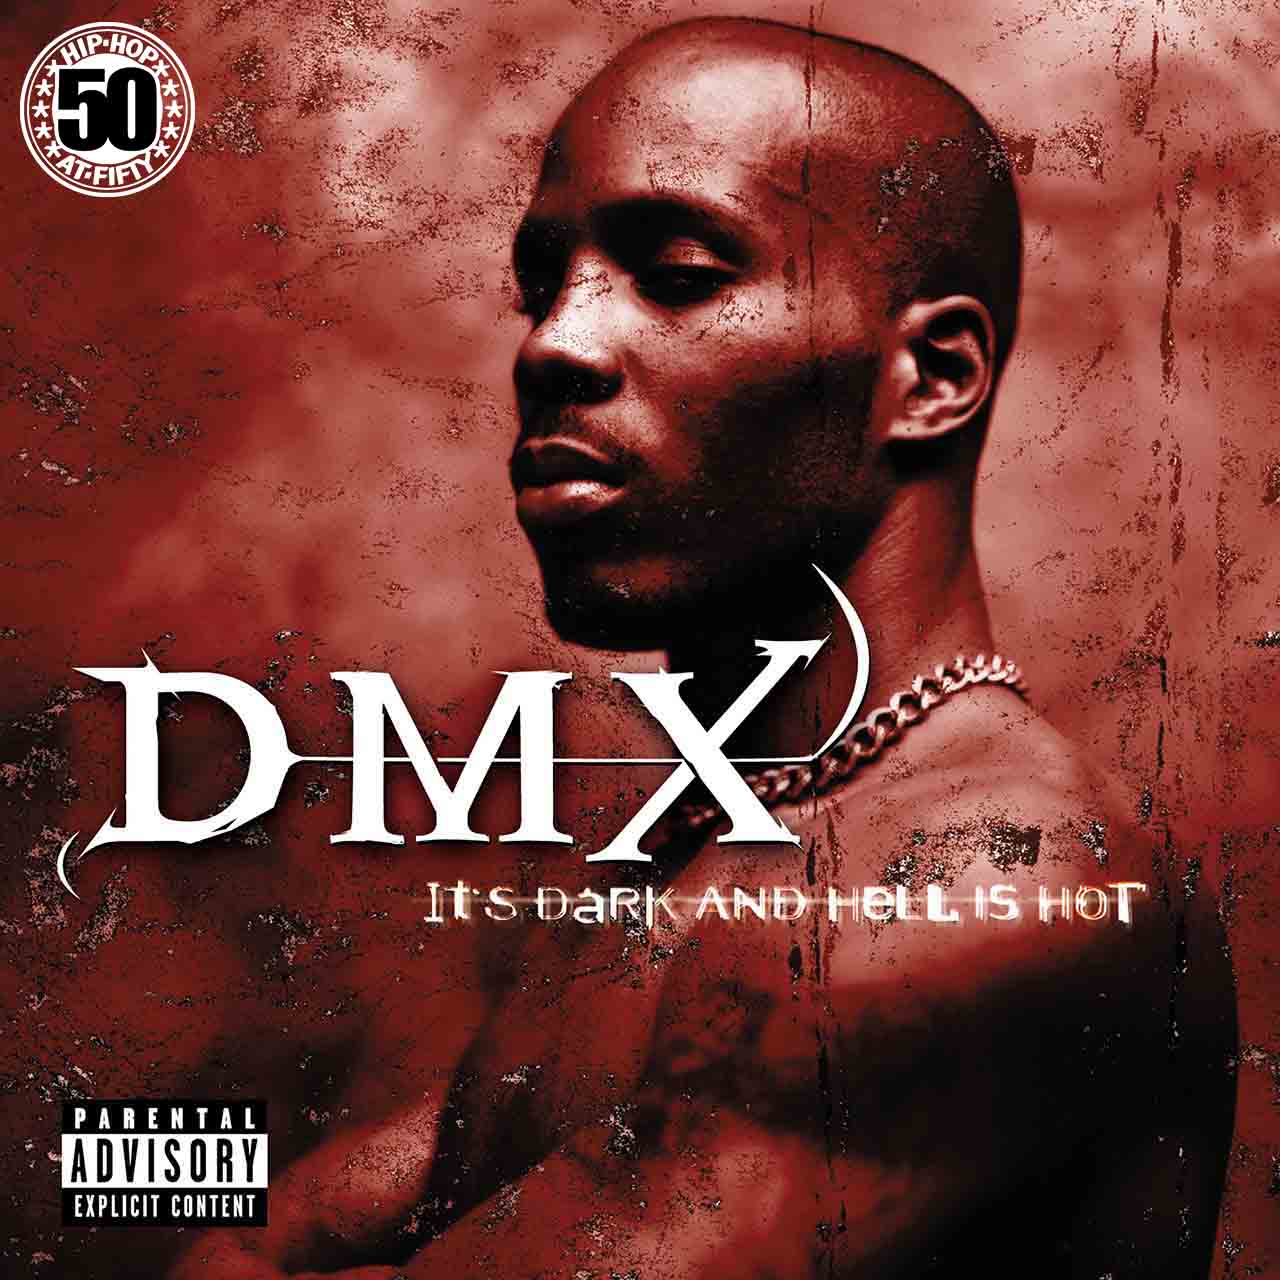 'It's Dark And Hell Is Hot': How DMX's First Album Brought Real Rap Back